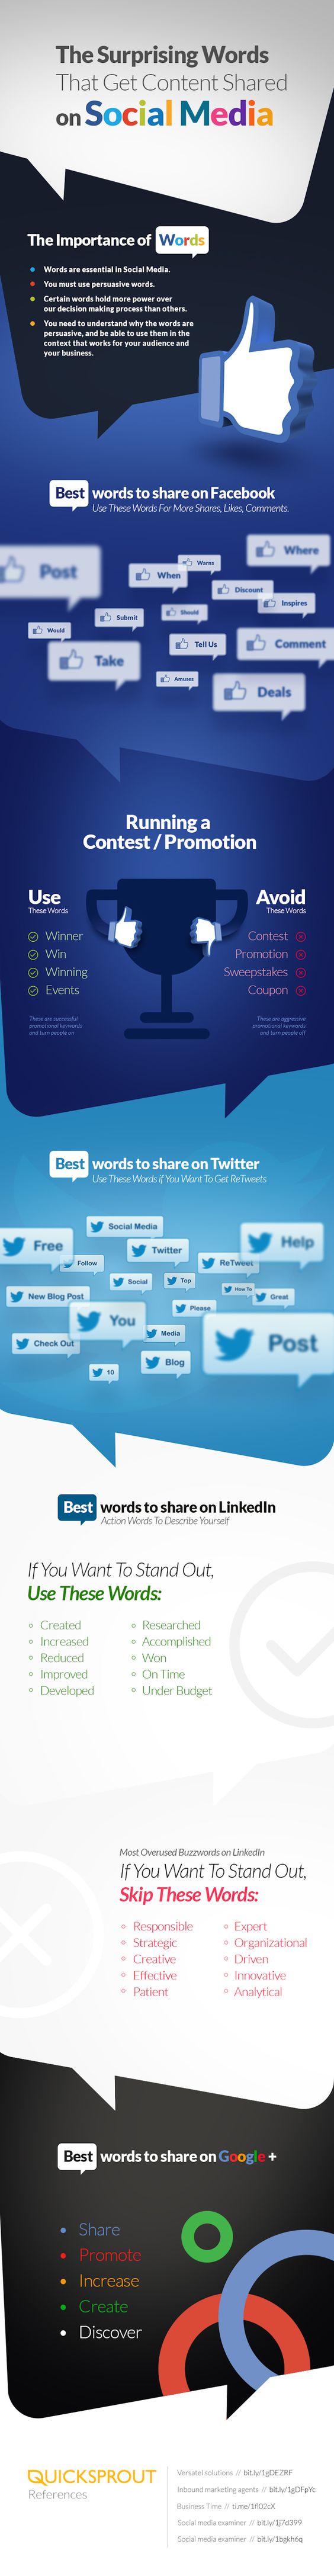 The Surprising Words That Get Content Shared On Social Media.